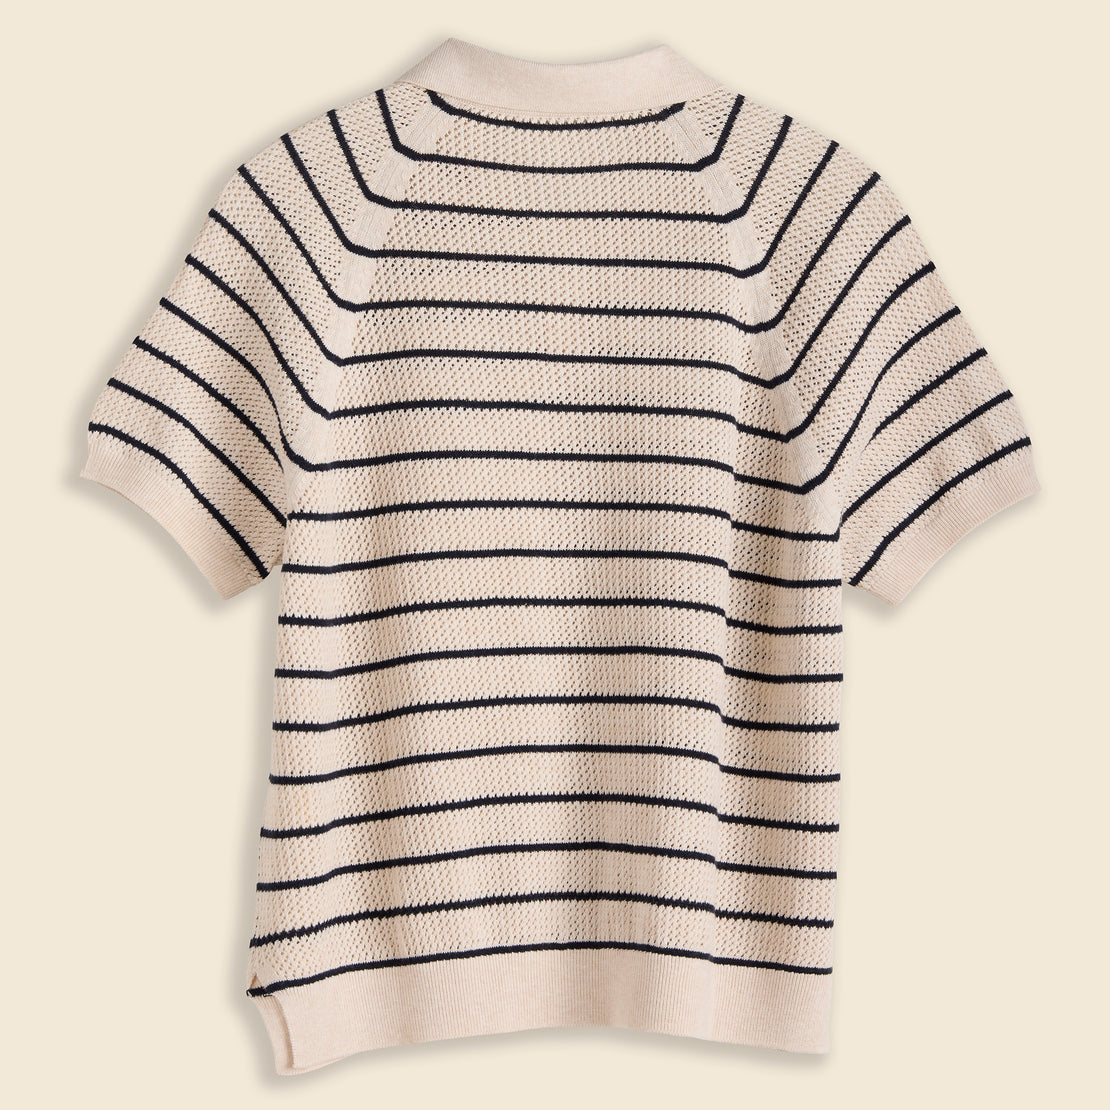 Polo Sweater in Stripe - Ivory/Navy - Alex Mill - STAG Provisions - W - Tops - S/S Knit